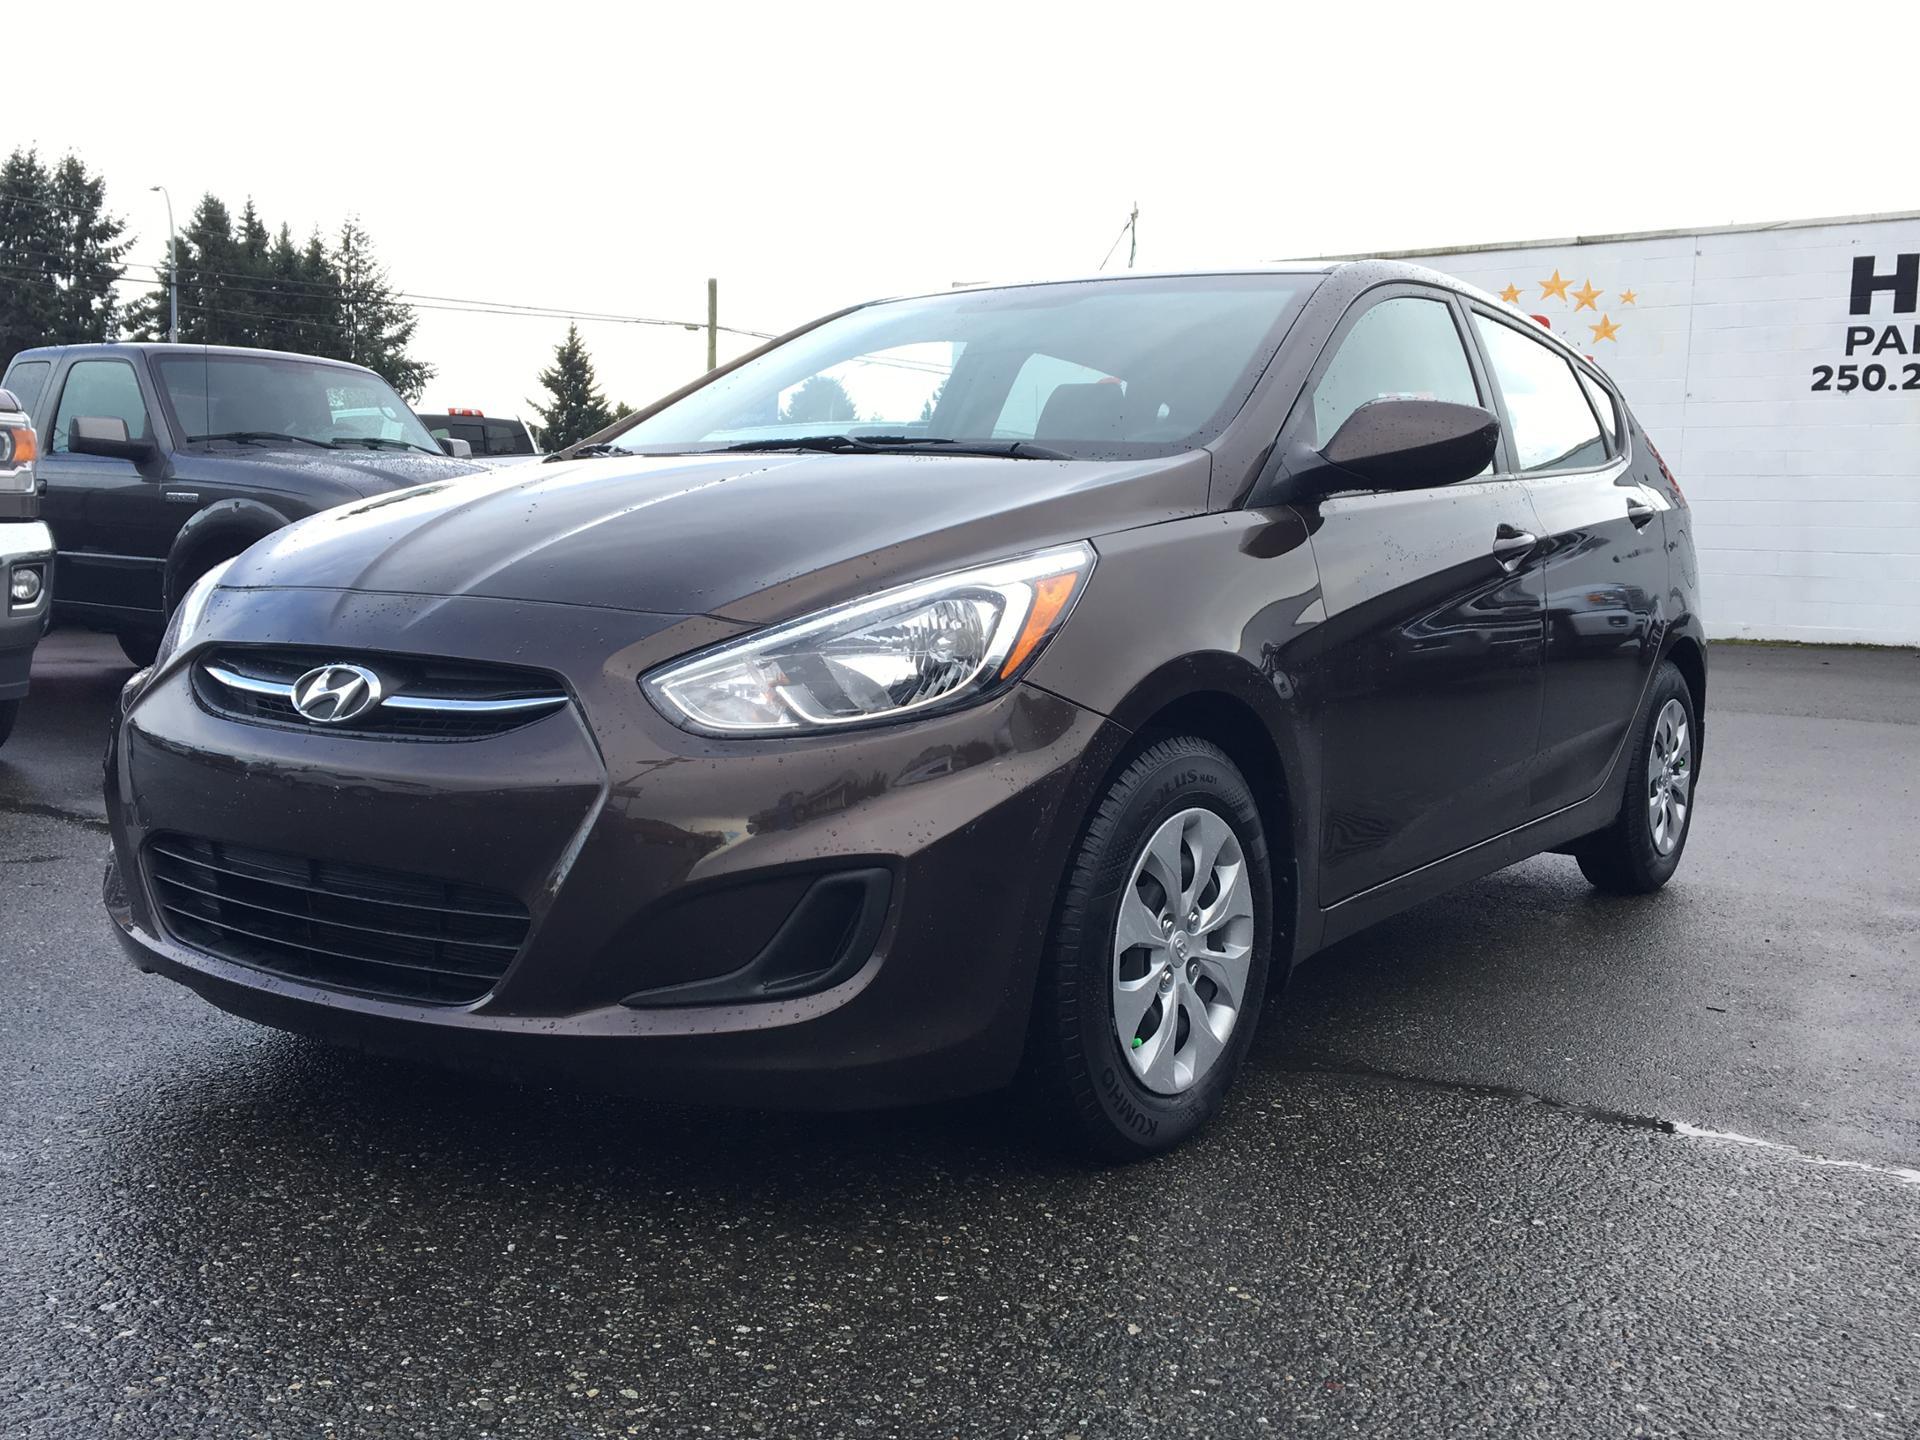 Pre-Owned 2016 Hyundai Accent Hatchback 4 Door in Parksville #18191A ...